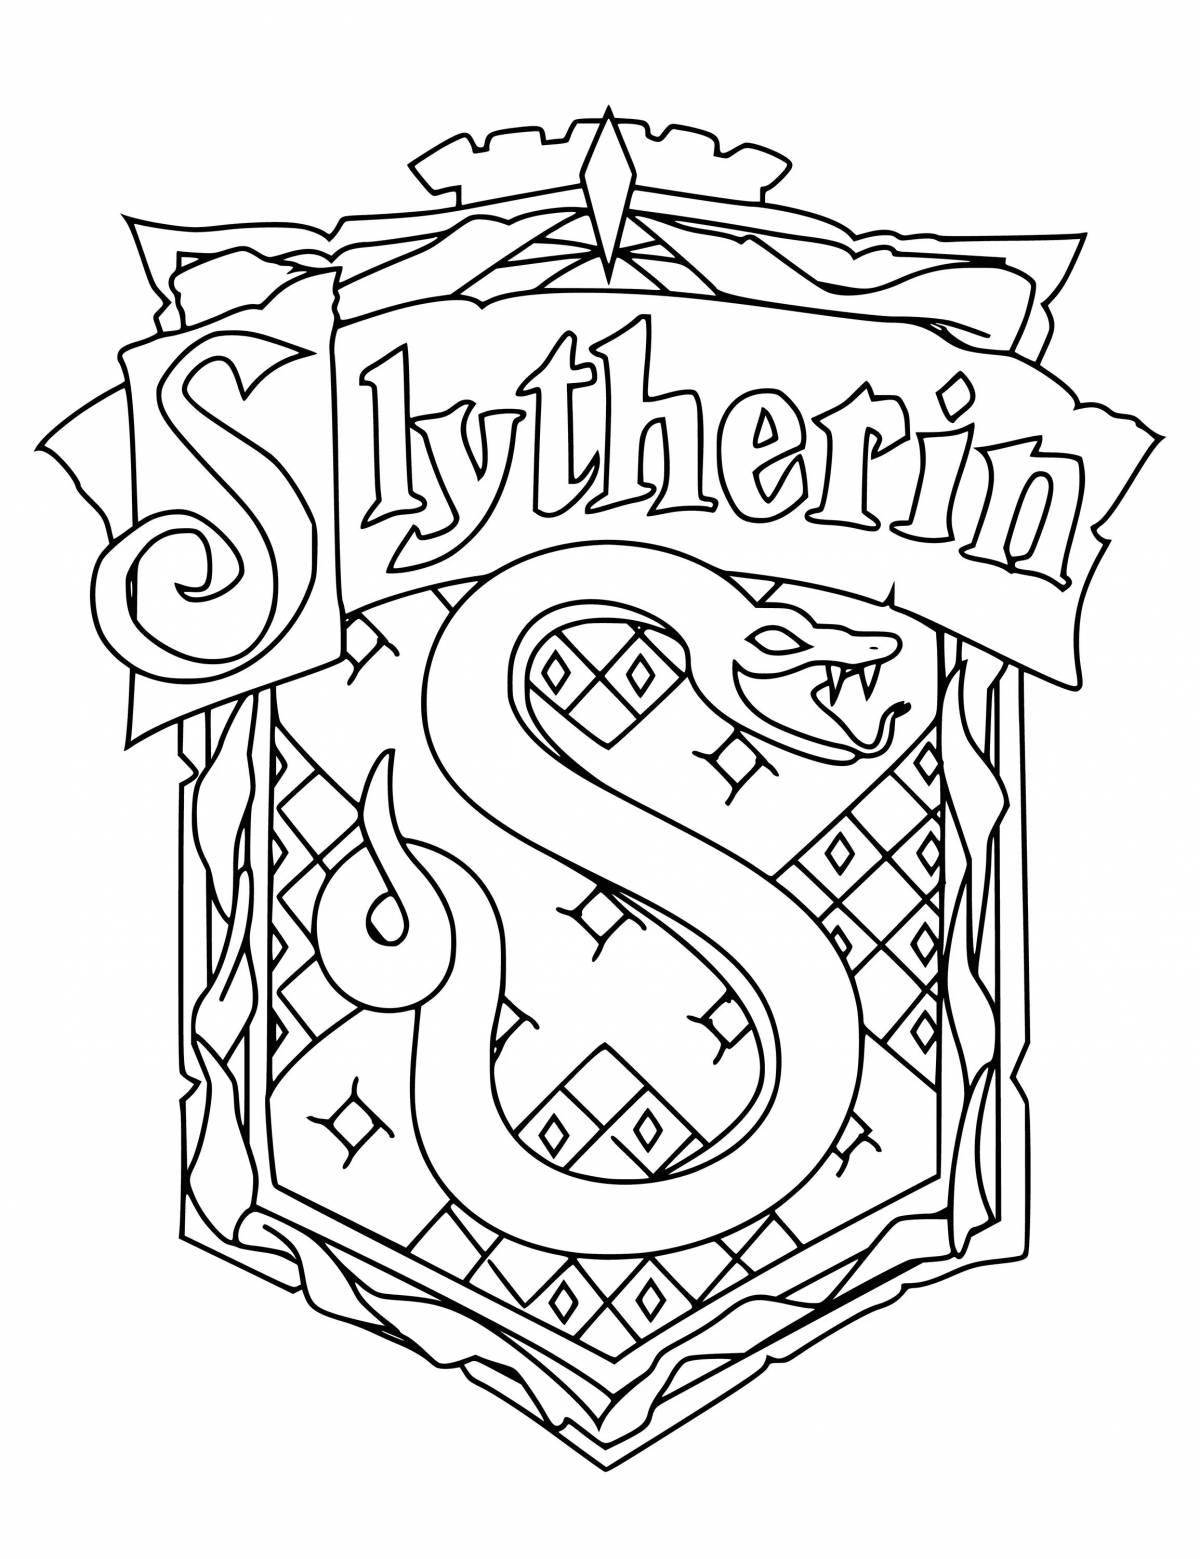 Coloring pages luxury Hogwarts houses